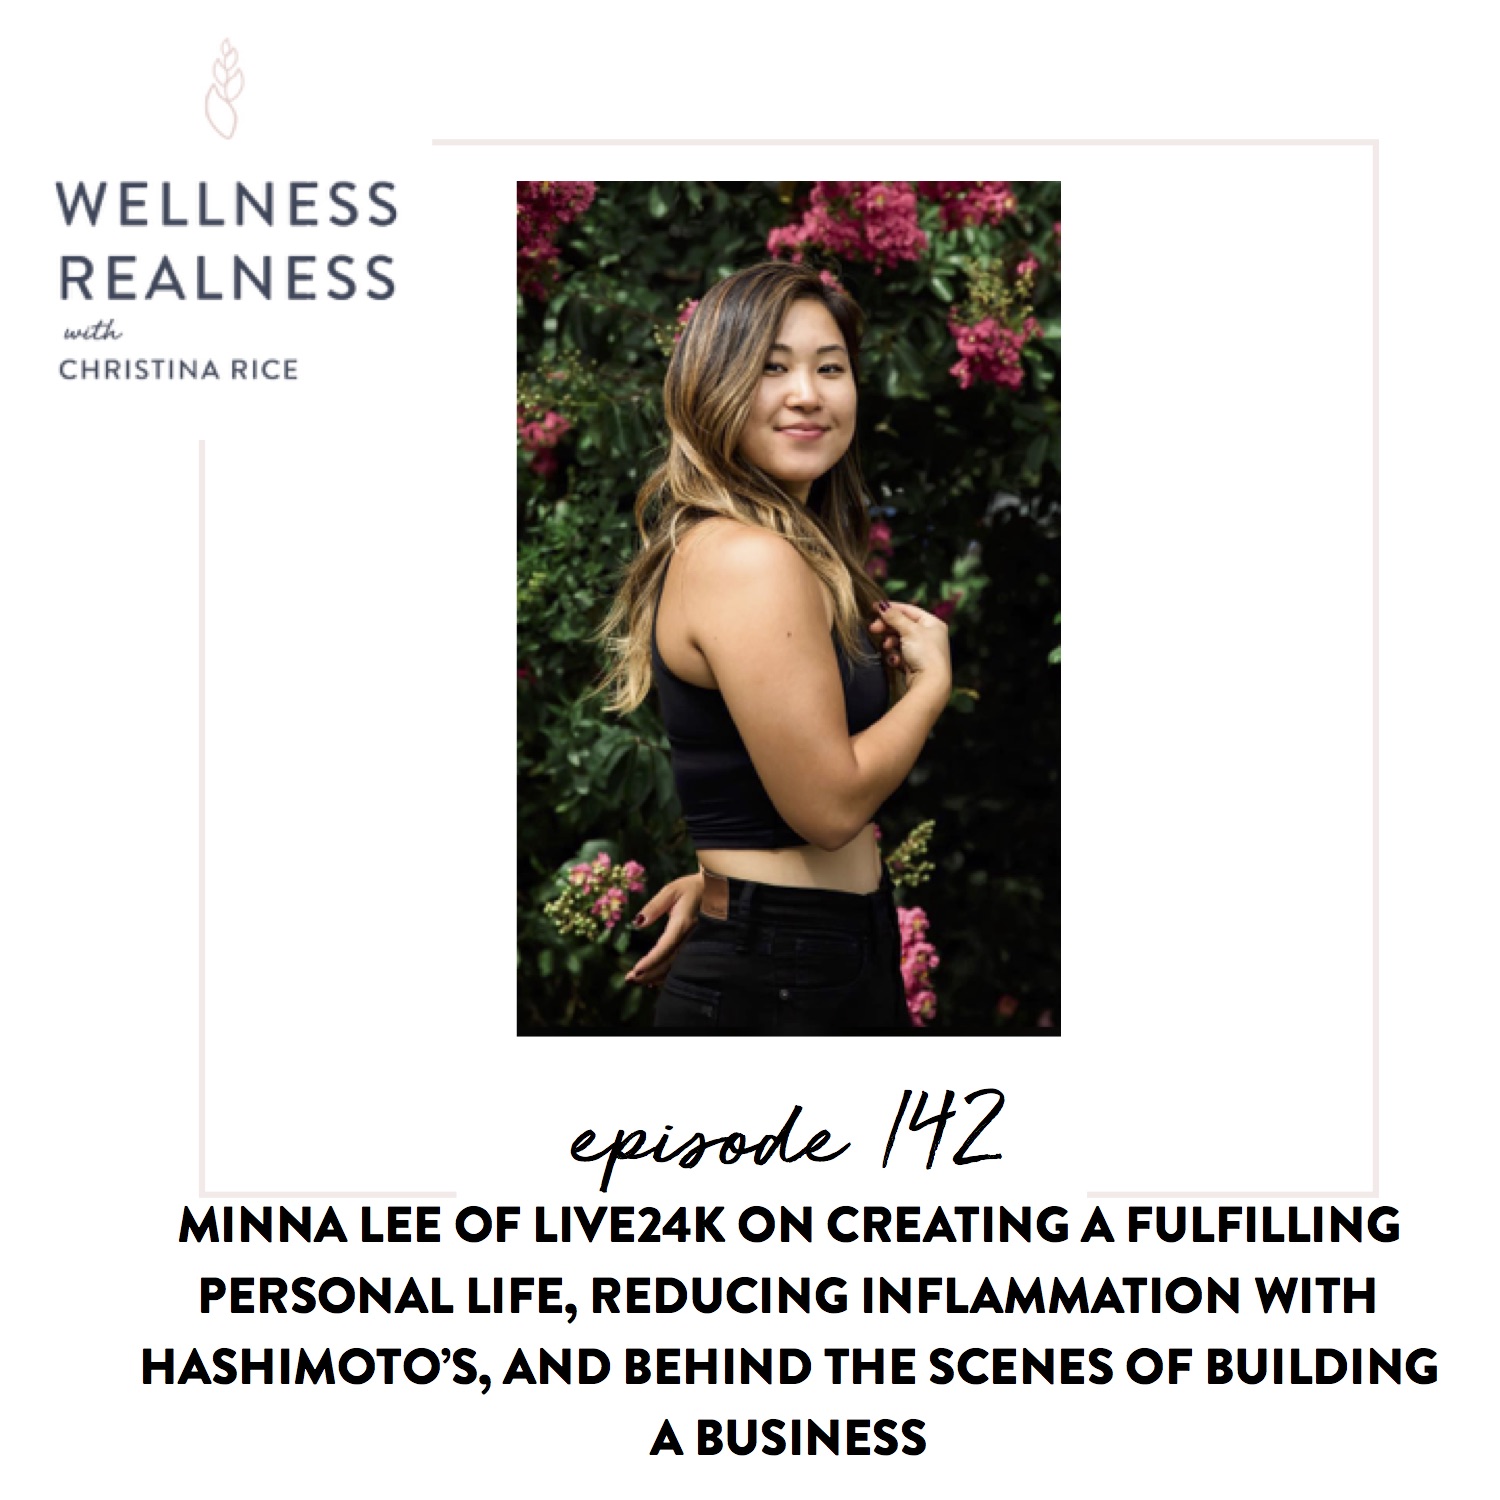 142: Minna Lee of Live24k on Creating a Fulfilling Personal Life, Reducing Inflammation with Hashimoto’s, and Behind the Scenes of Building a Business